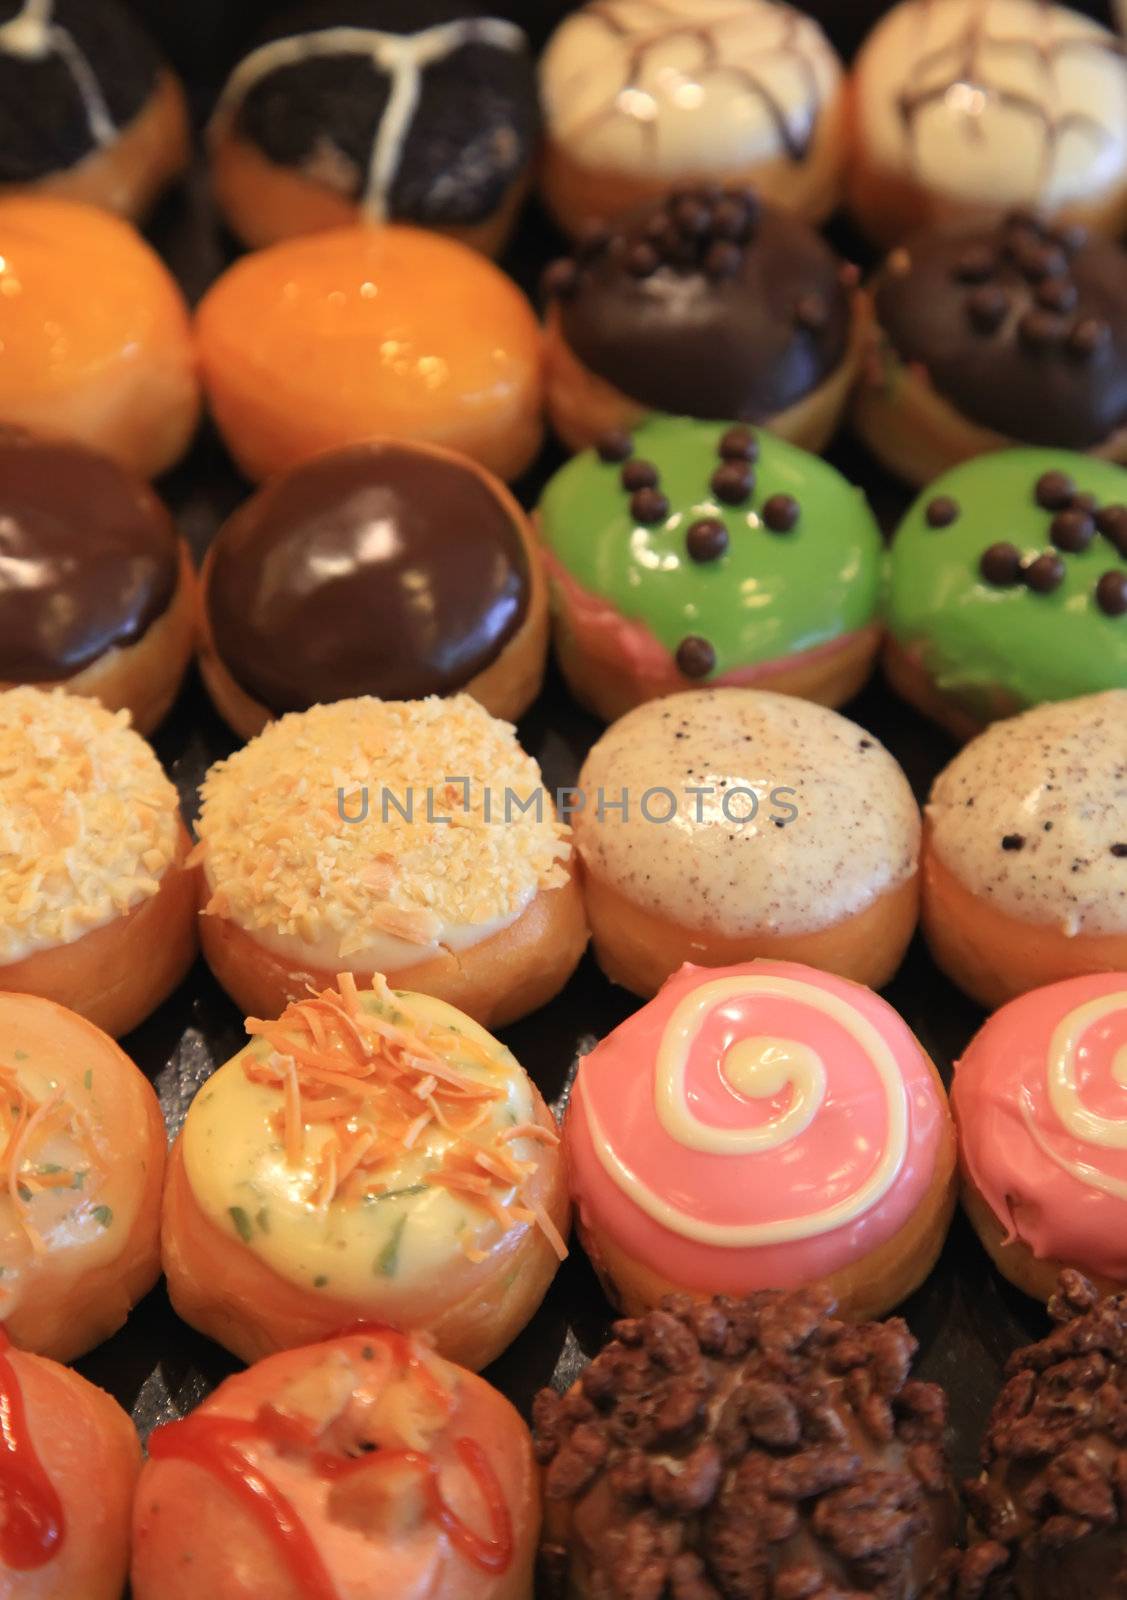 Assorted Donuts Variety in Dessert Store Shop